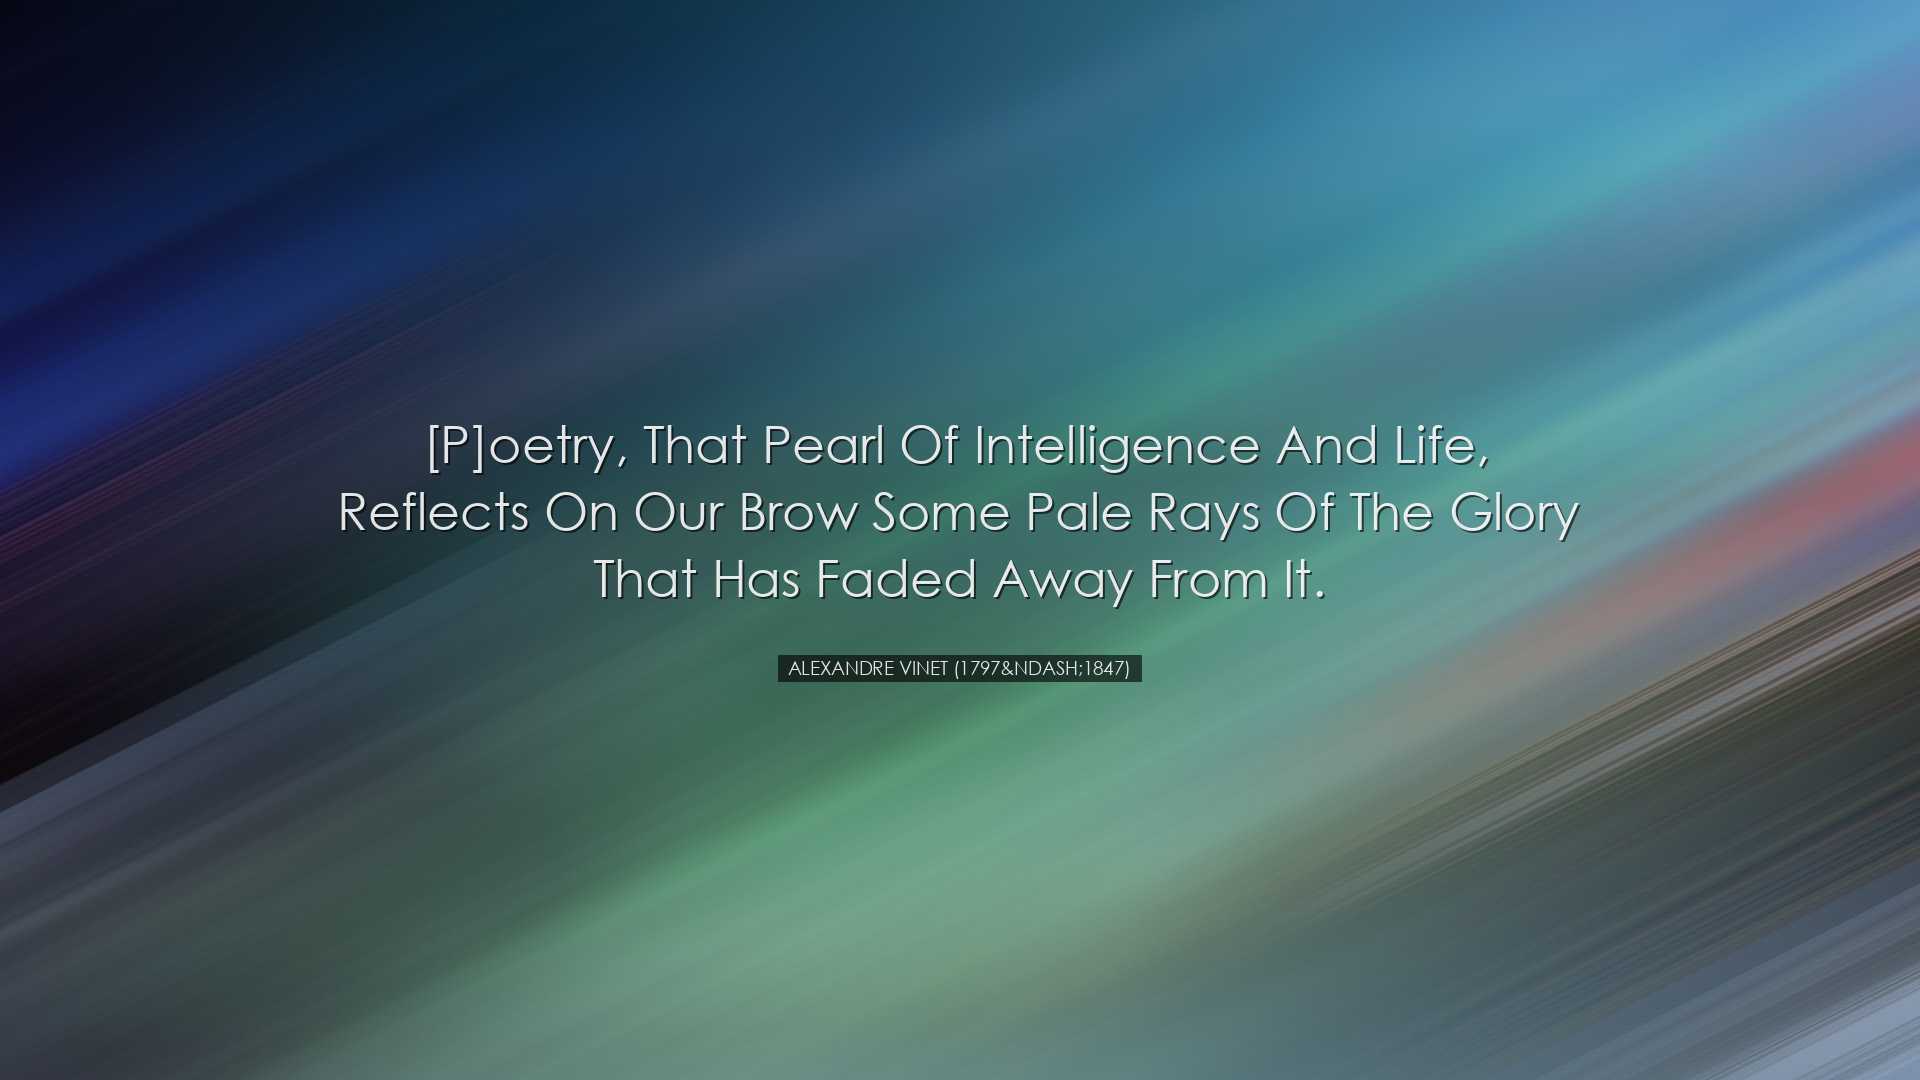 [P]oetry, that pearl of intelligence and life, reflects on our bro